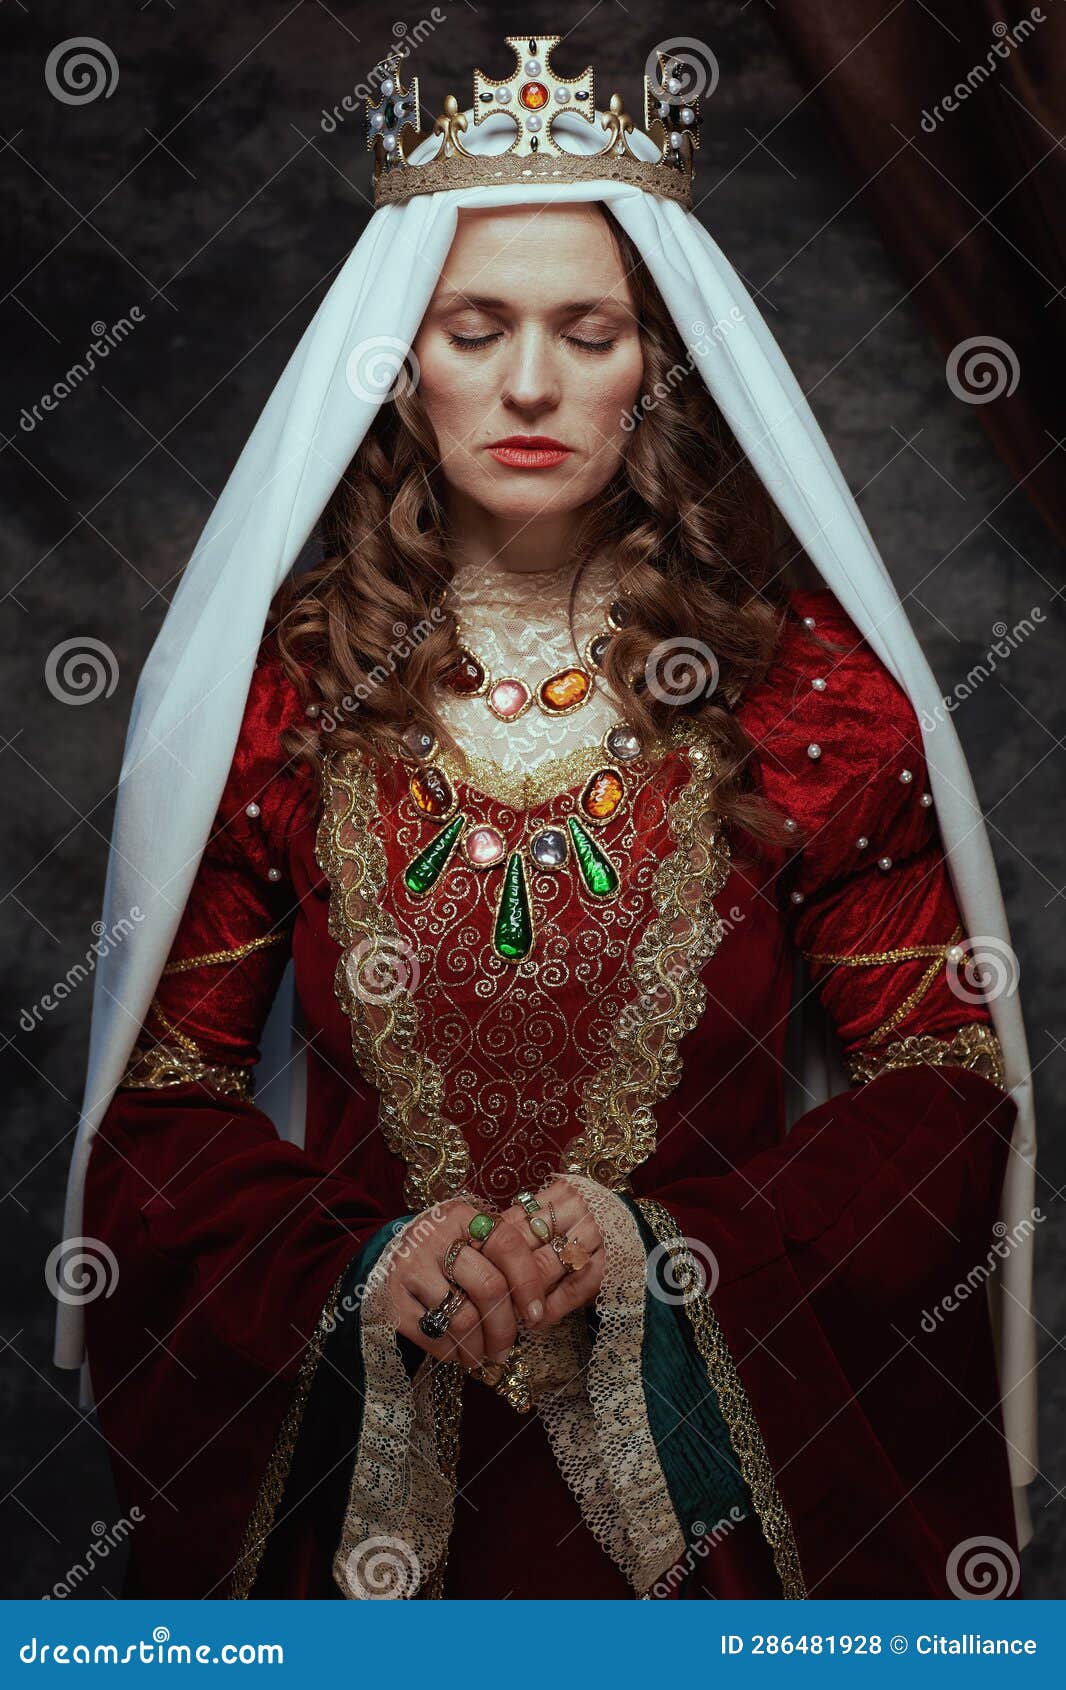 Medieval Queen in Red Dress with Veil and Crown Stock Photo - Image of ...